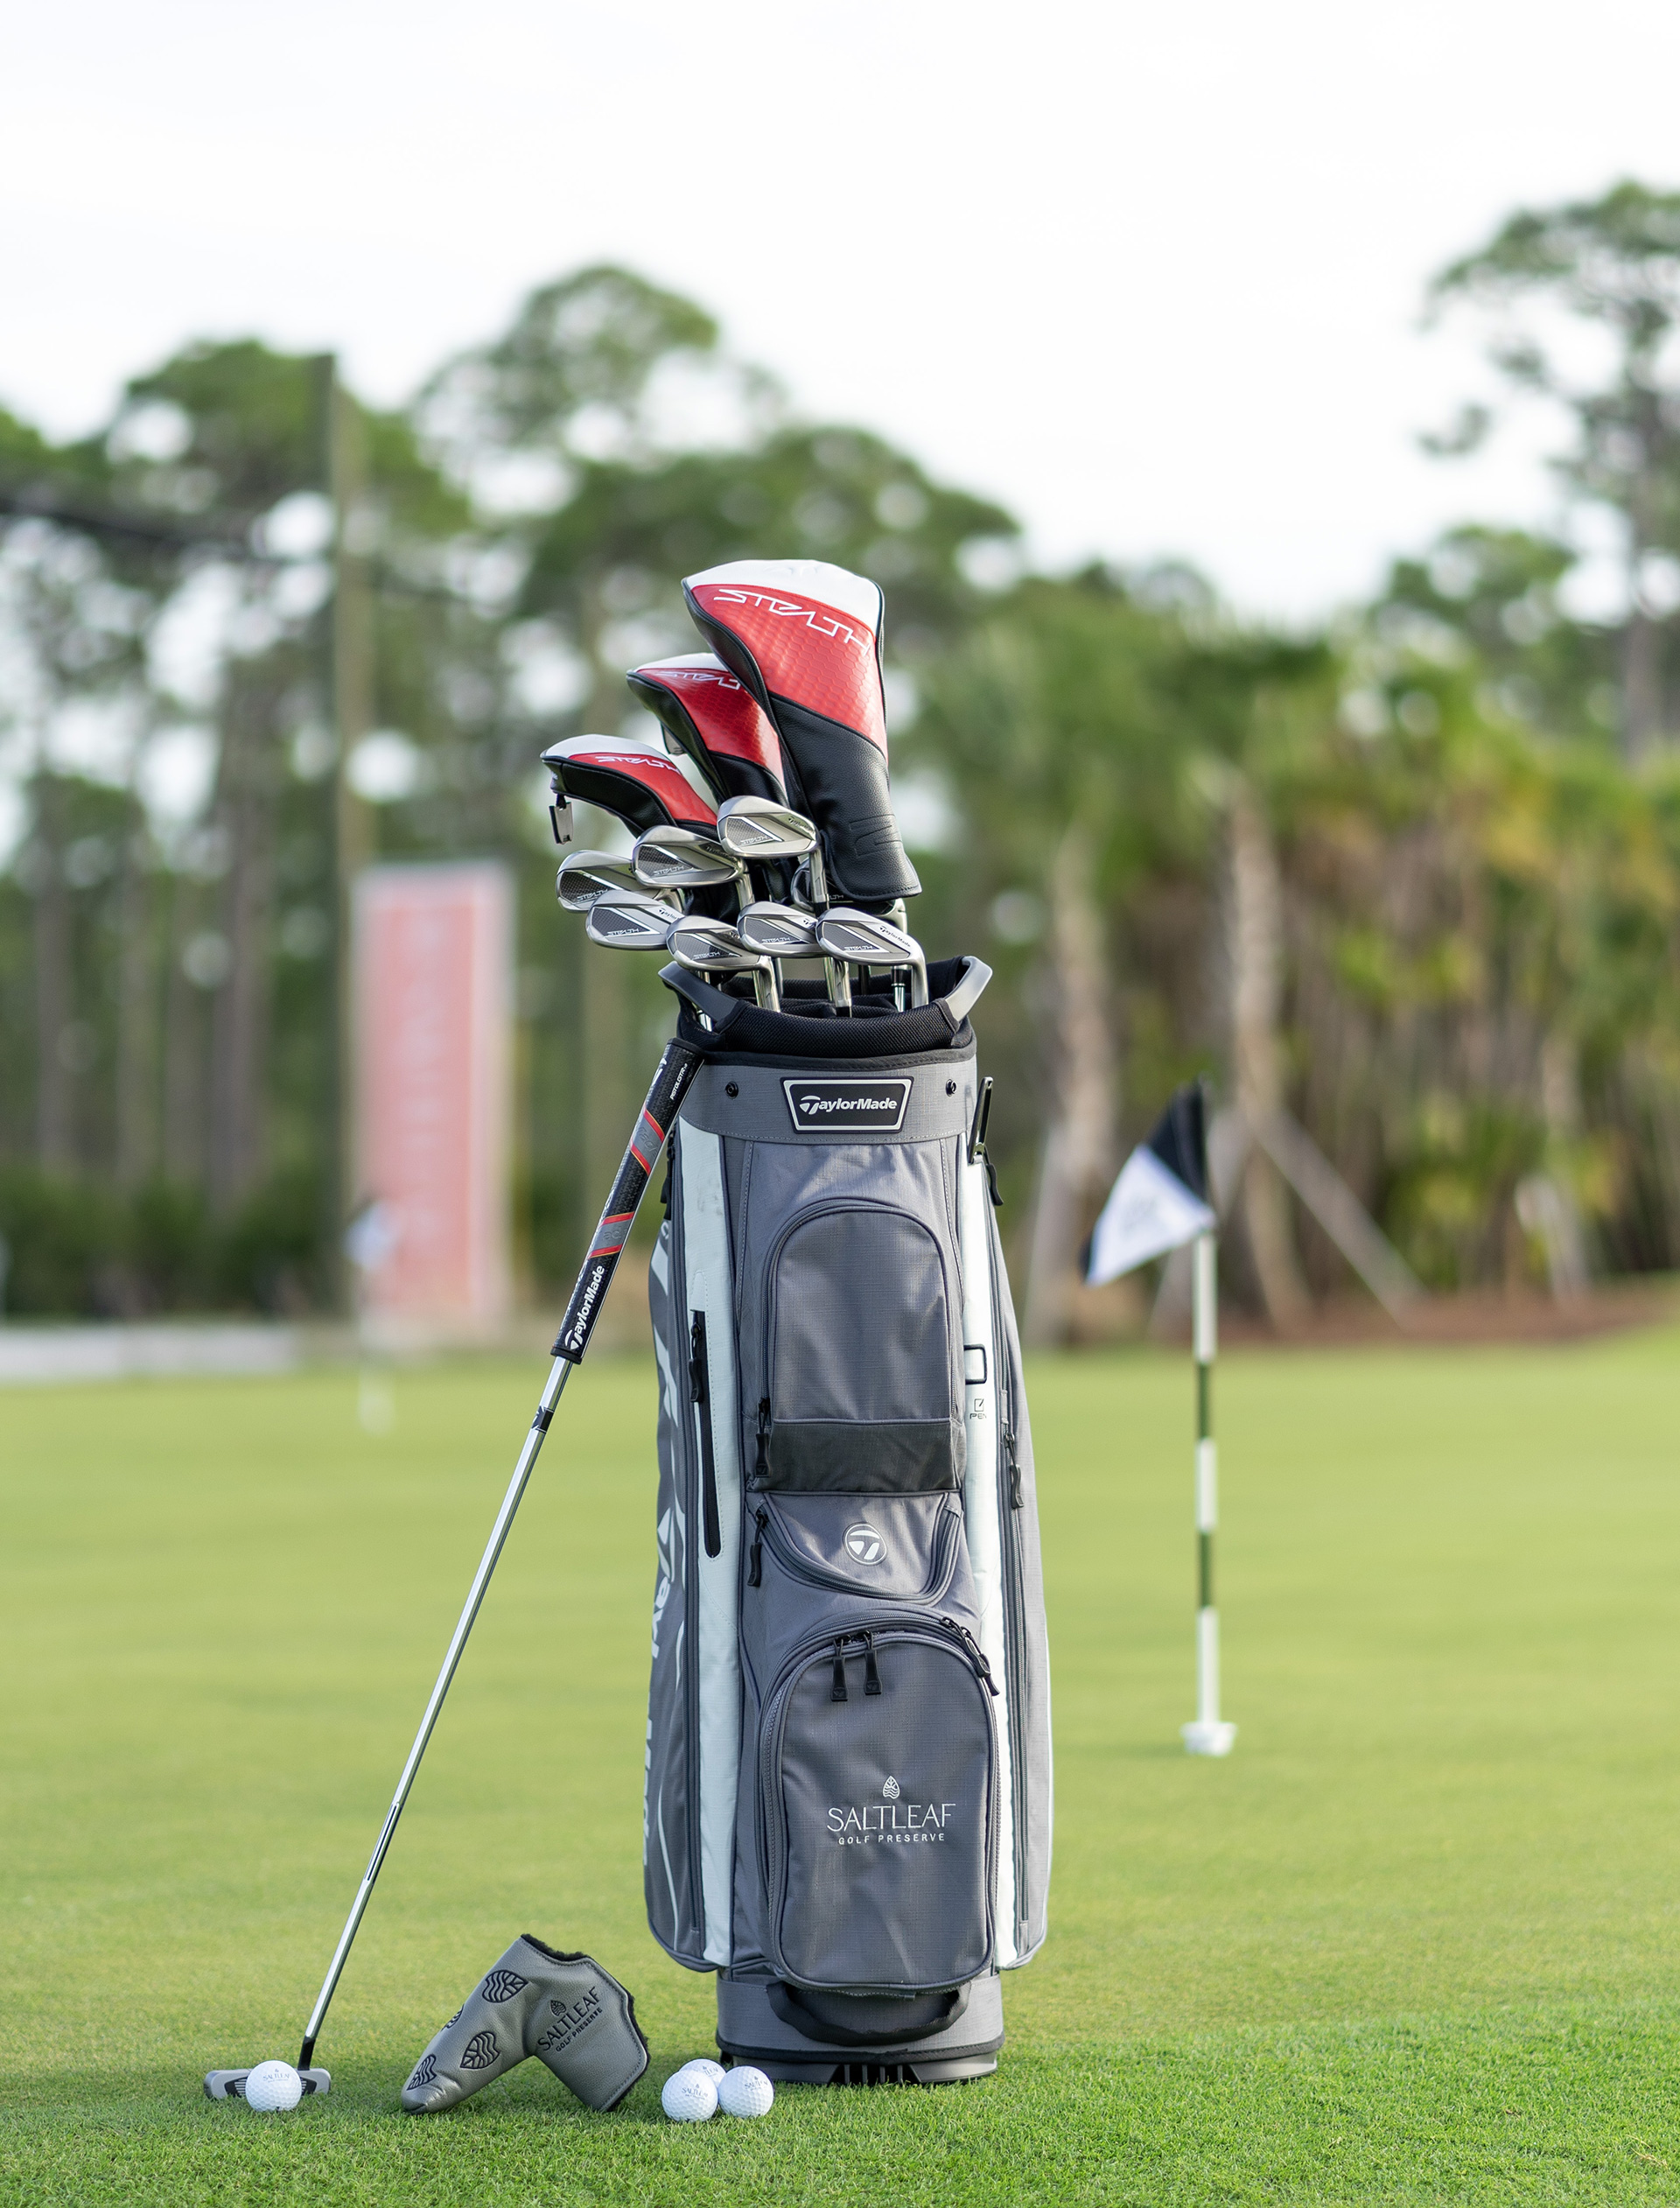 A golf bag adorned with clubs, ready for a round at the Saltleaf Golf Preserve in Bonita Springs.